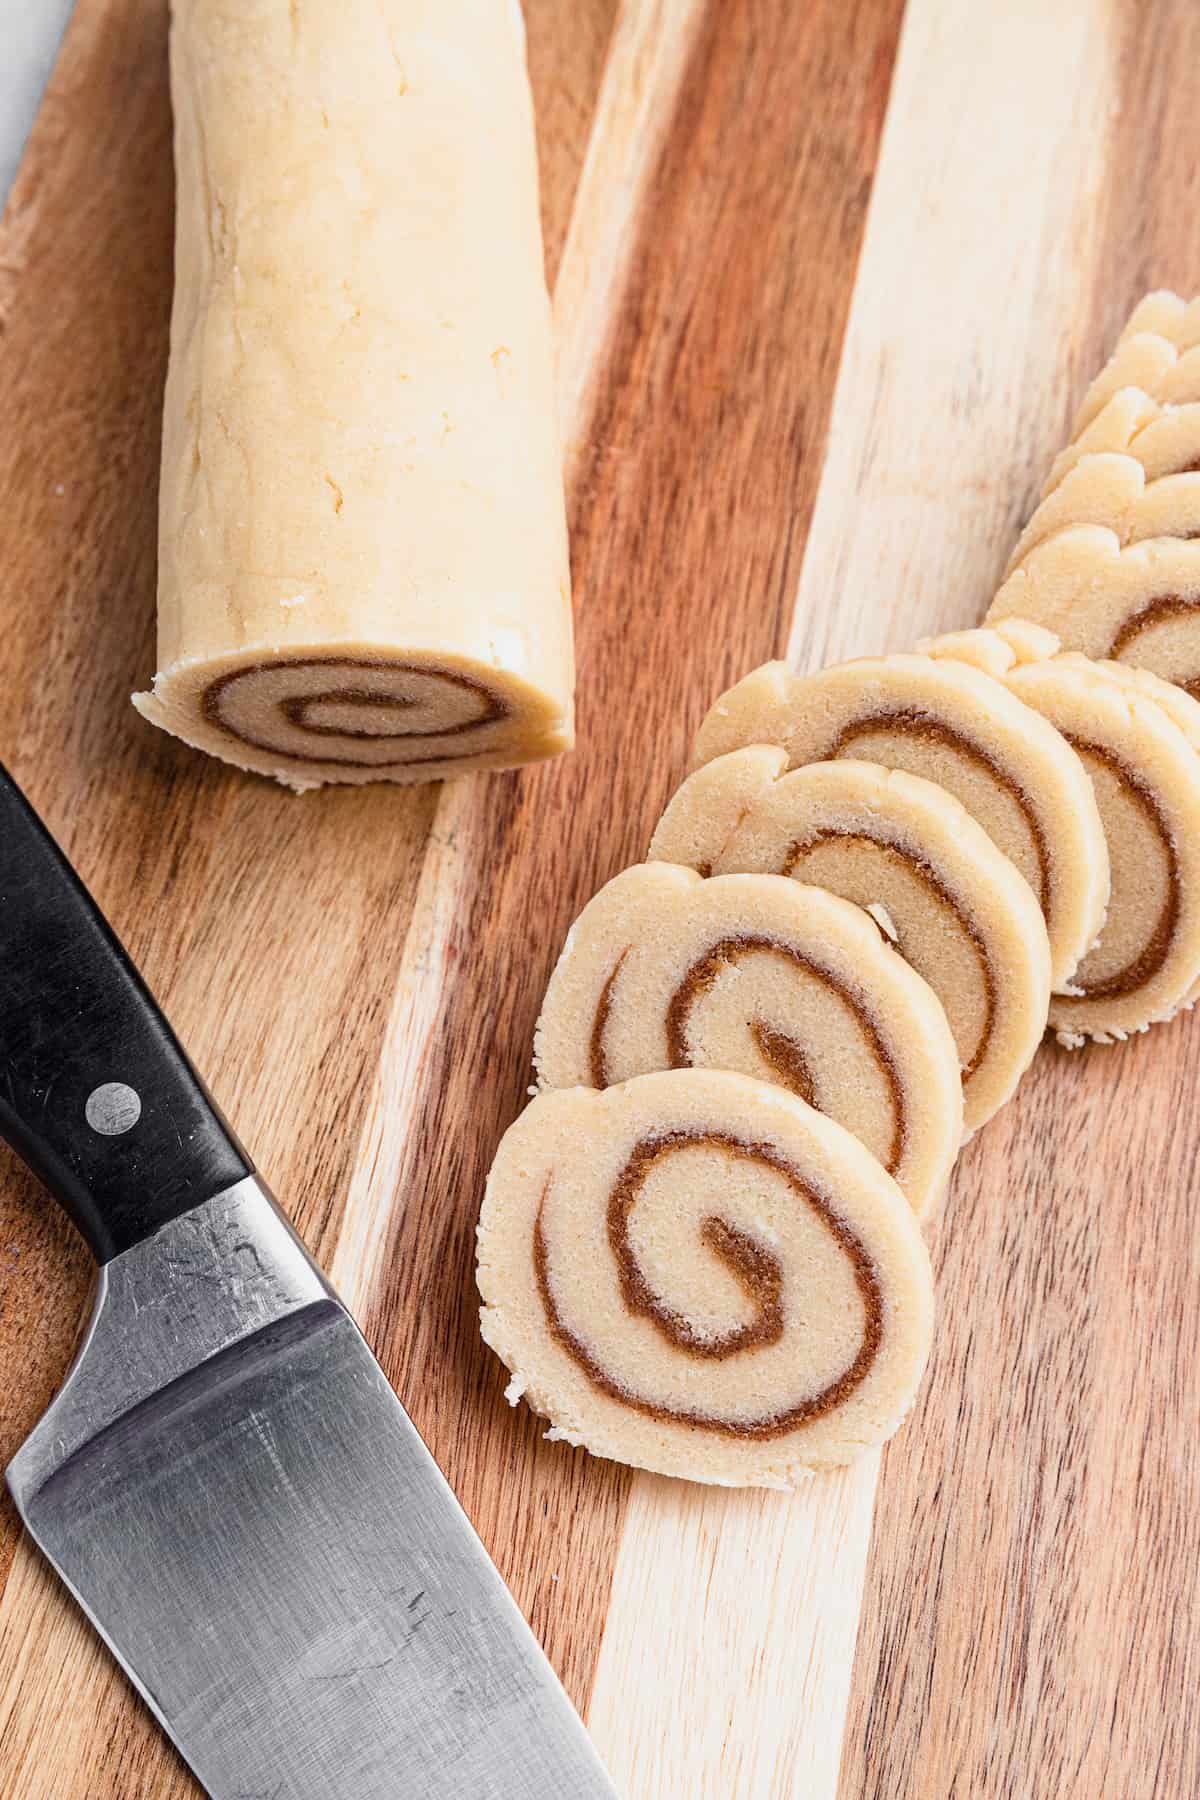 The Log of Rolled Cookie Dough Beside a Sharp Knife and Cut Out Cookies